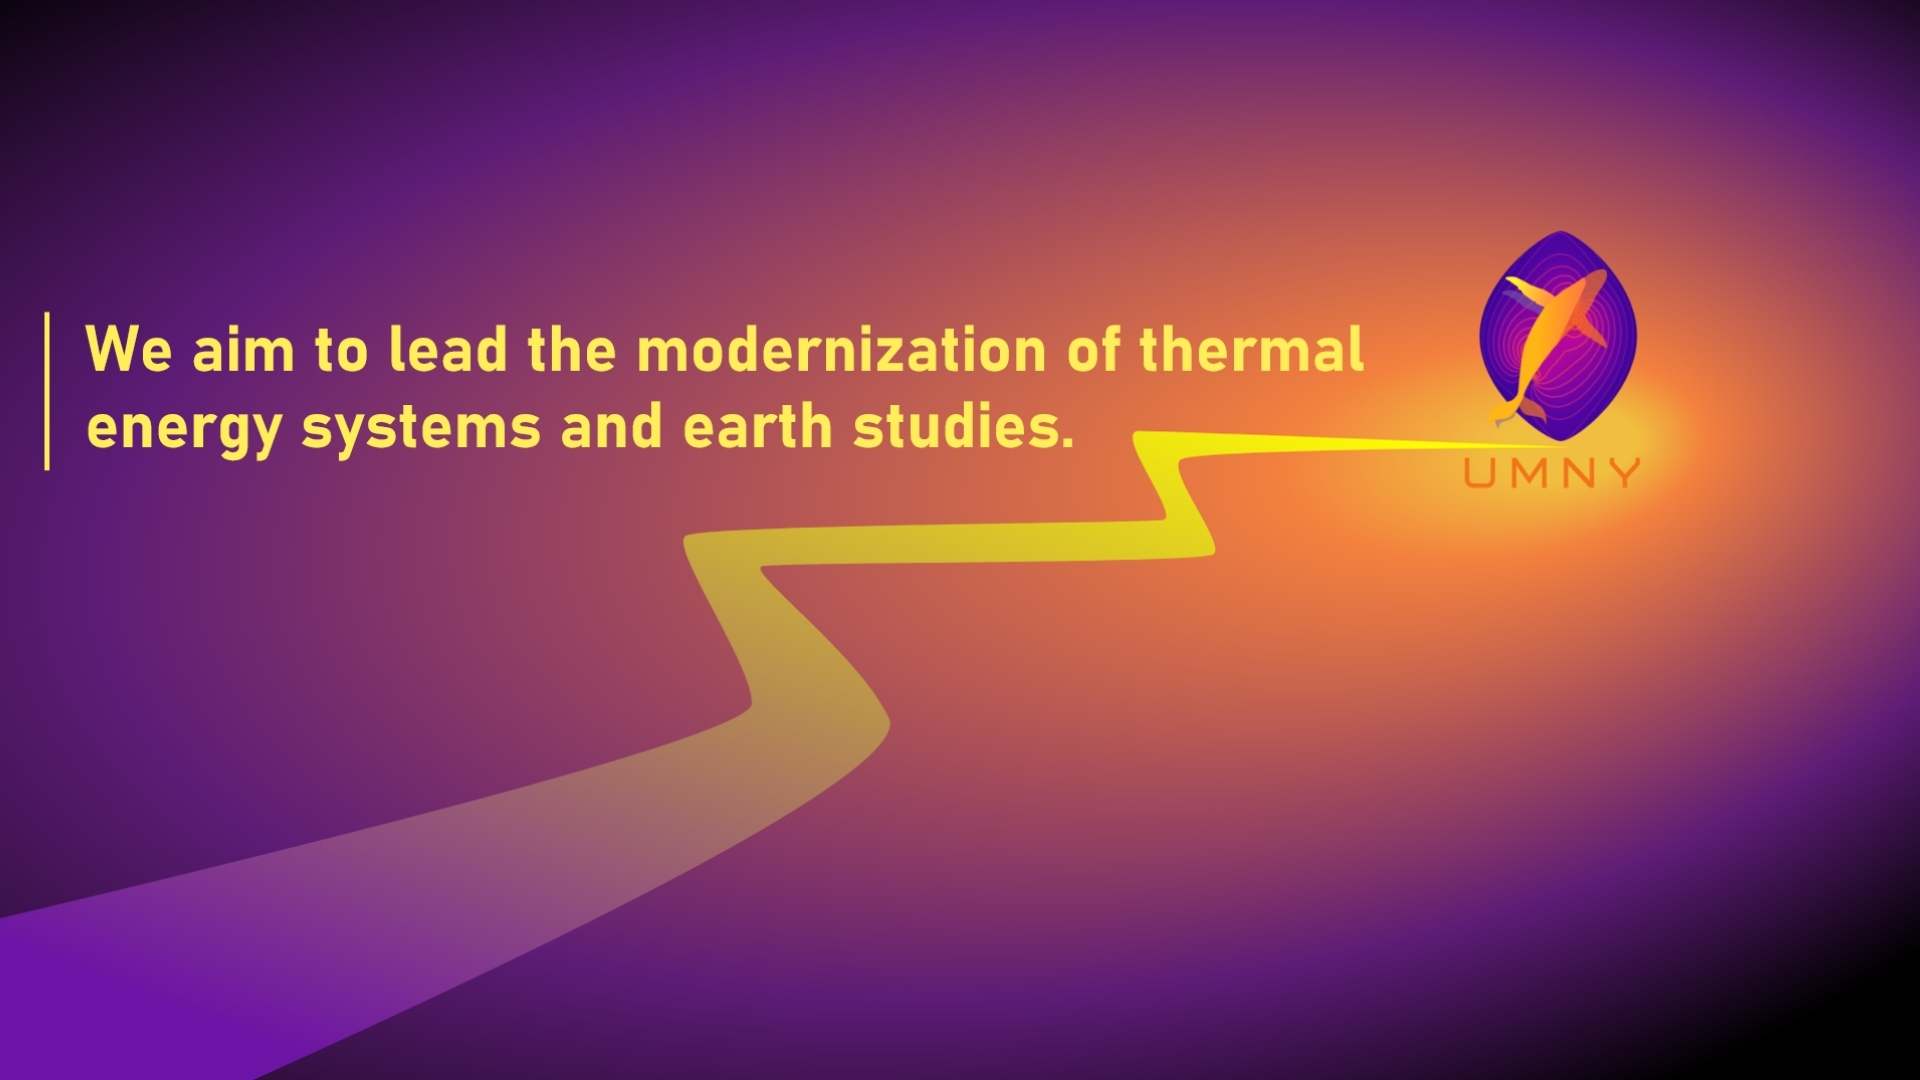 We aim to lead the modernization of thermal energy systems and earth studies.